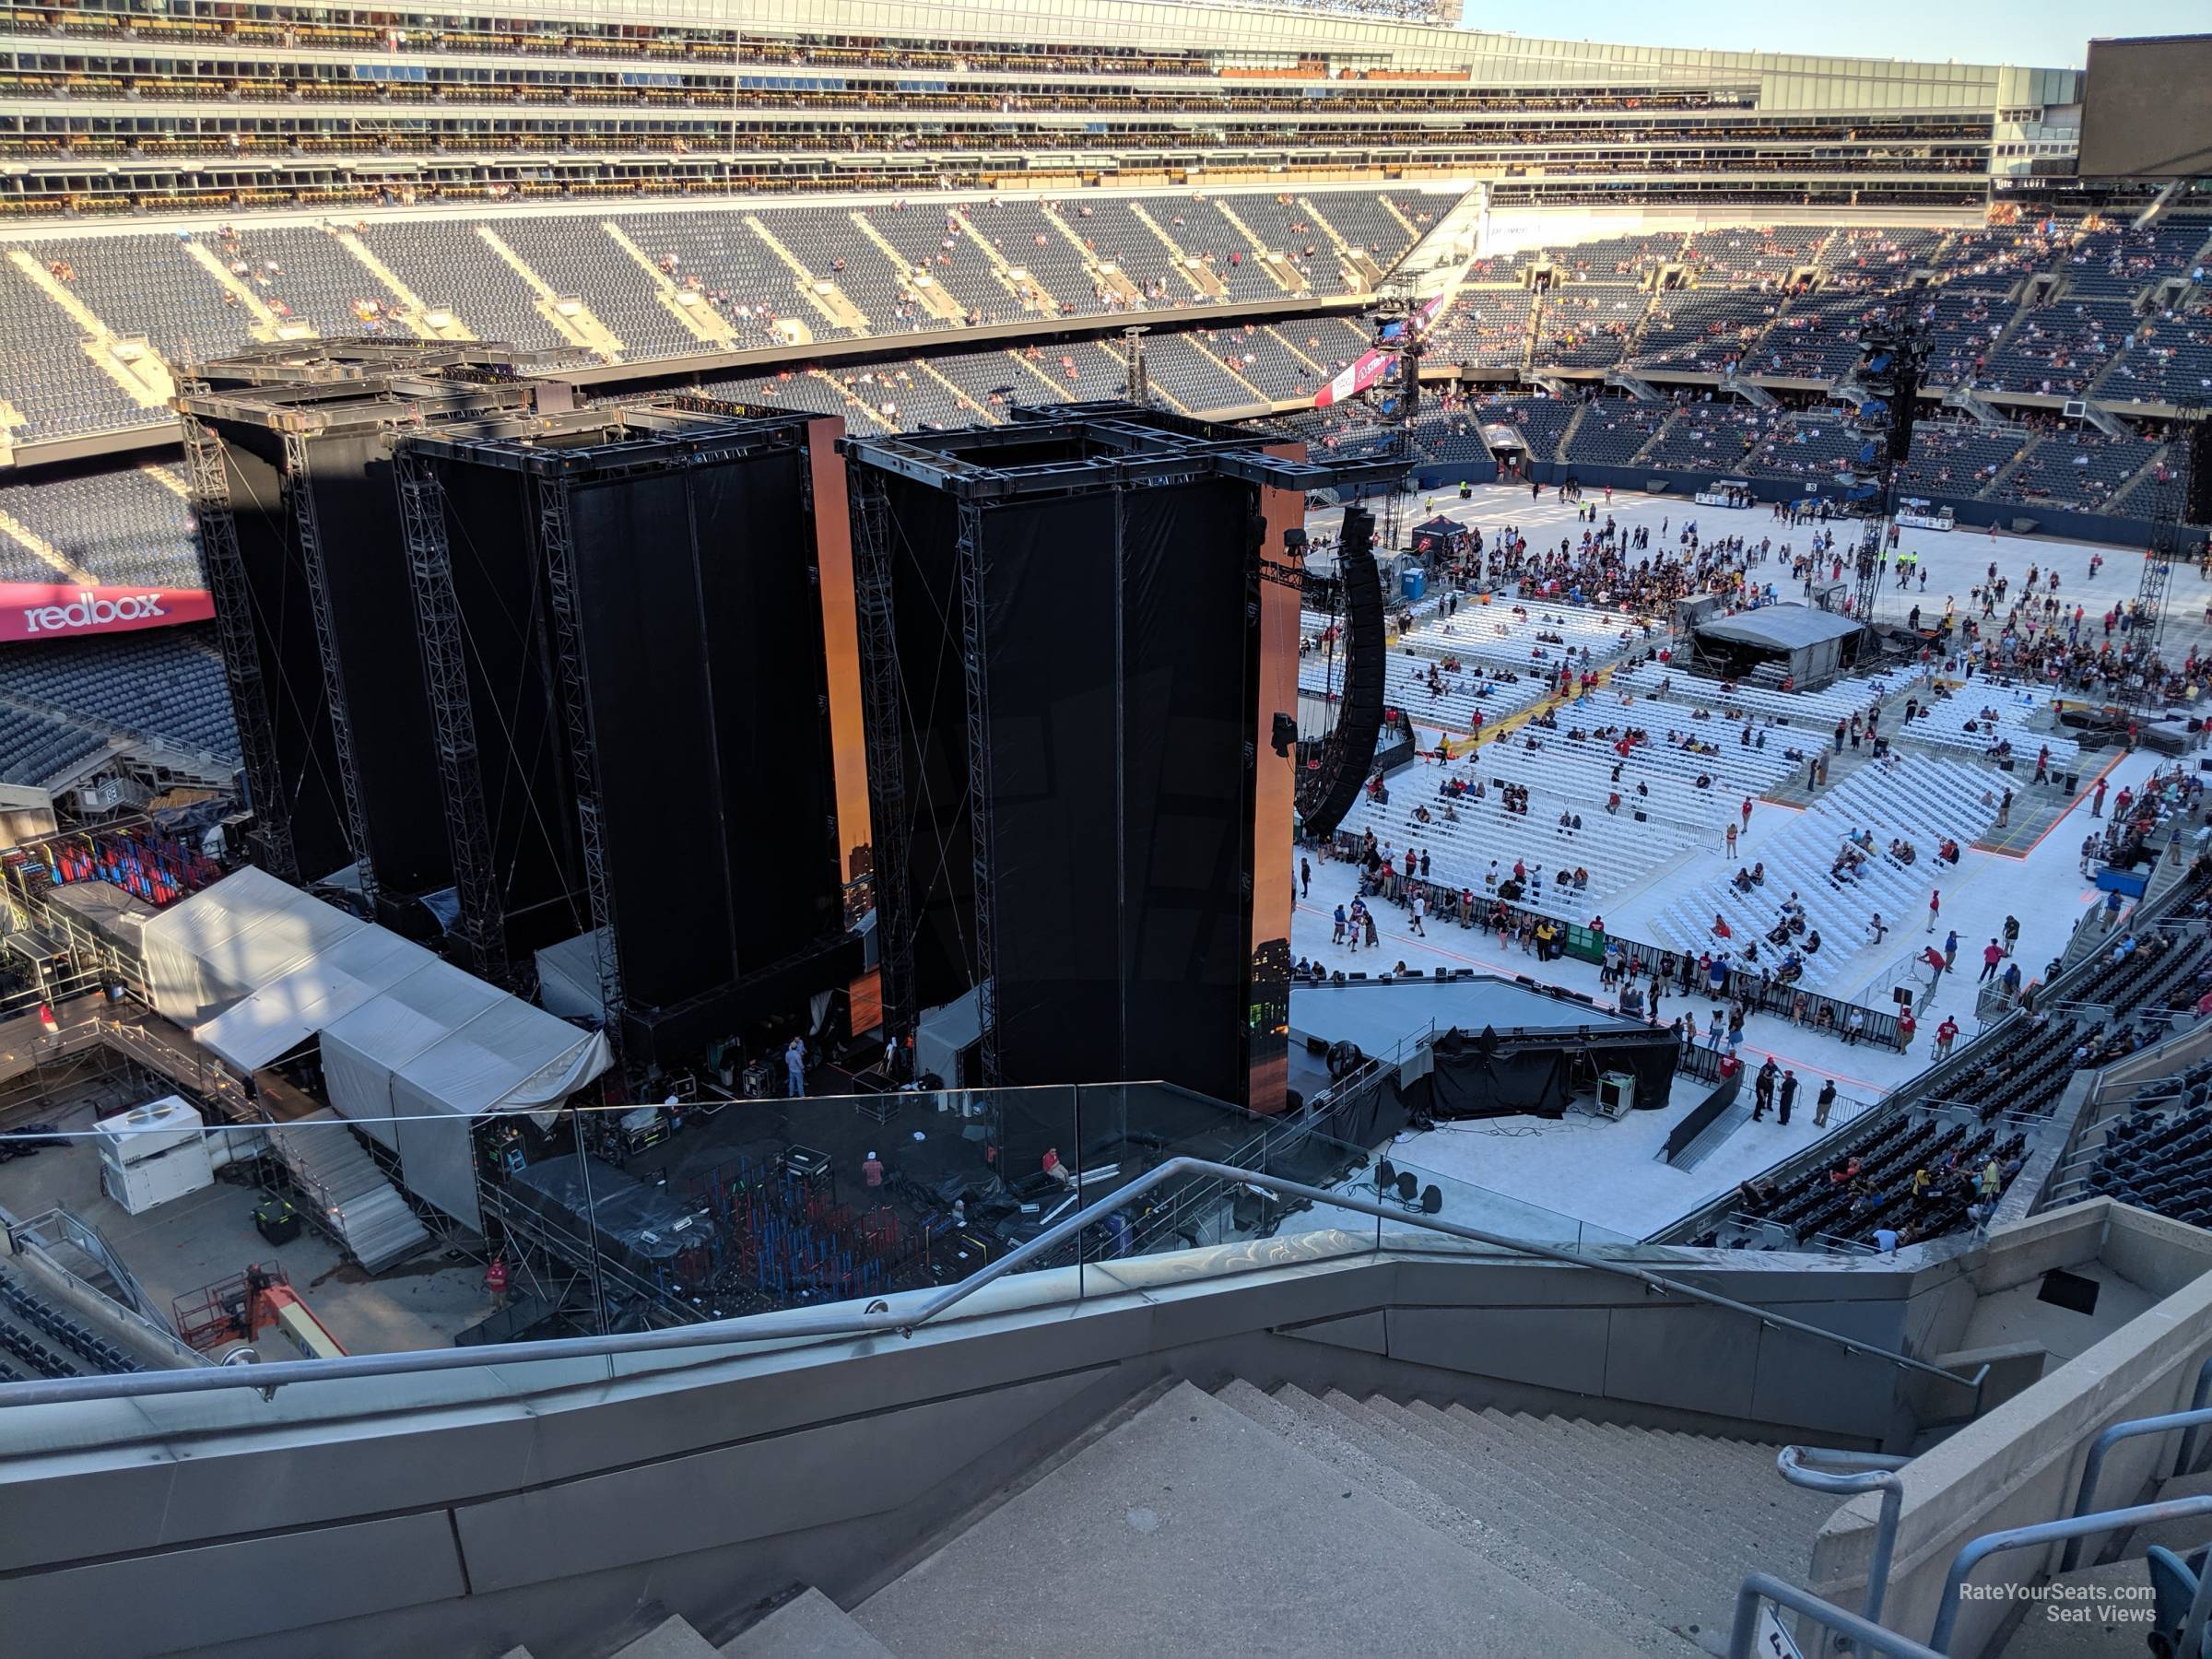 section 447, row 9 seat view  for concert - soldier field